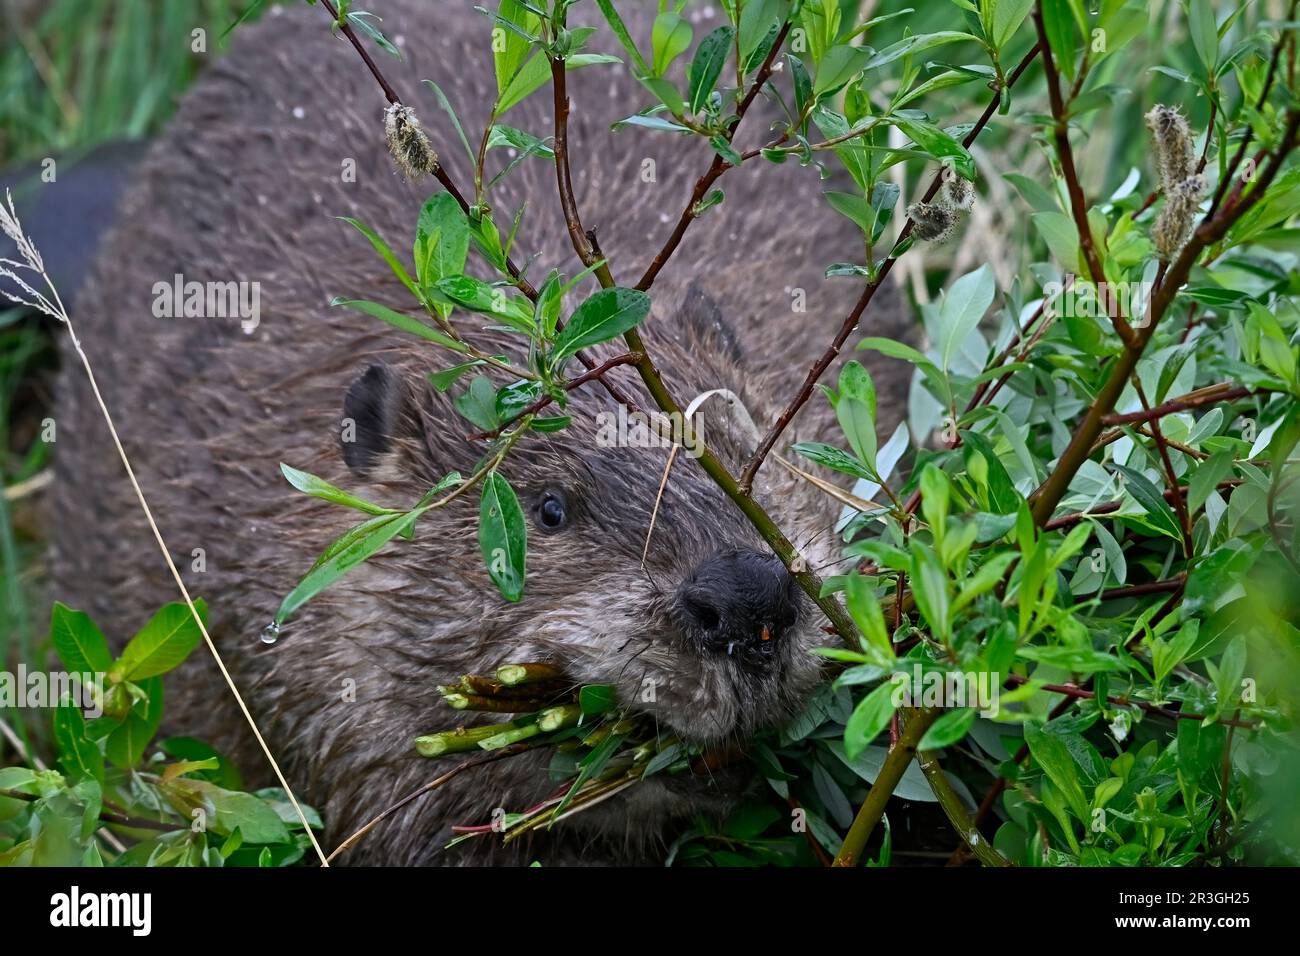 A close up image of a wild beaver, Castor canadensis,  gathering a mouthful of willow saplings to take back to his lodge for lunch. Stock Photo